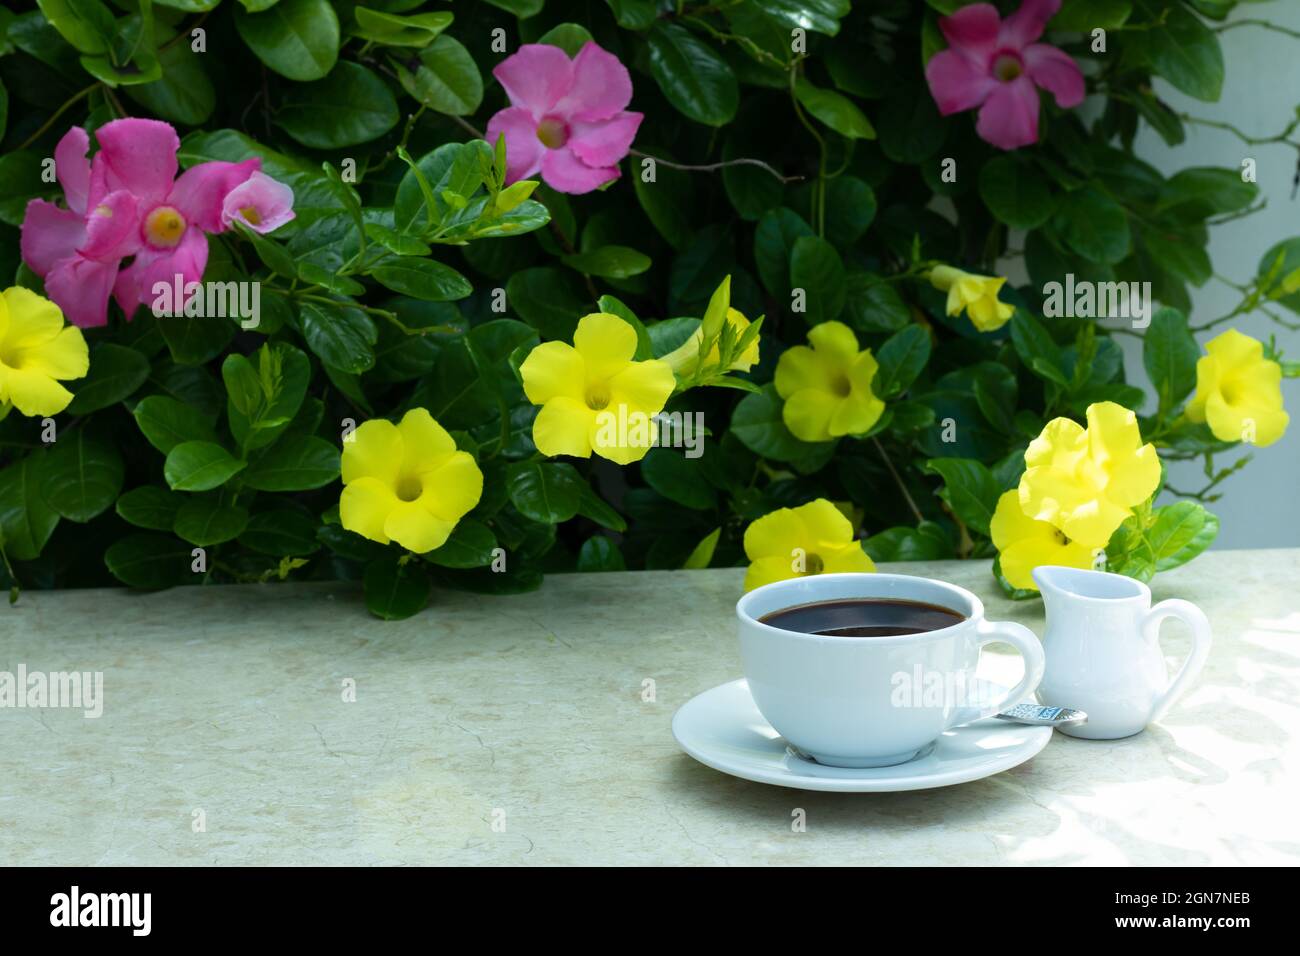 Beautiful coffee mug on the marble table. The background is a beautiful bush of yellow flowers and fresh green leaves. Stock Photo